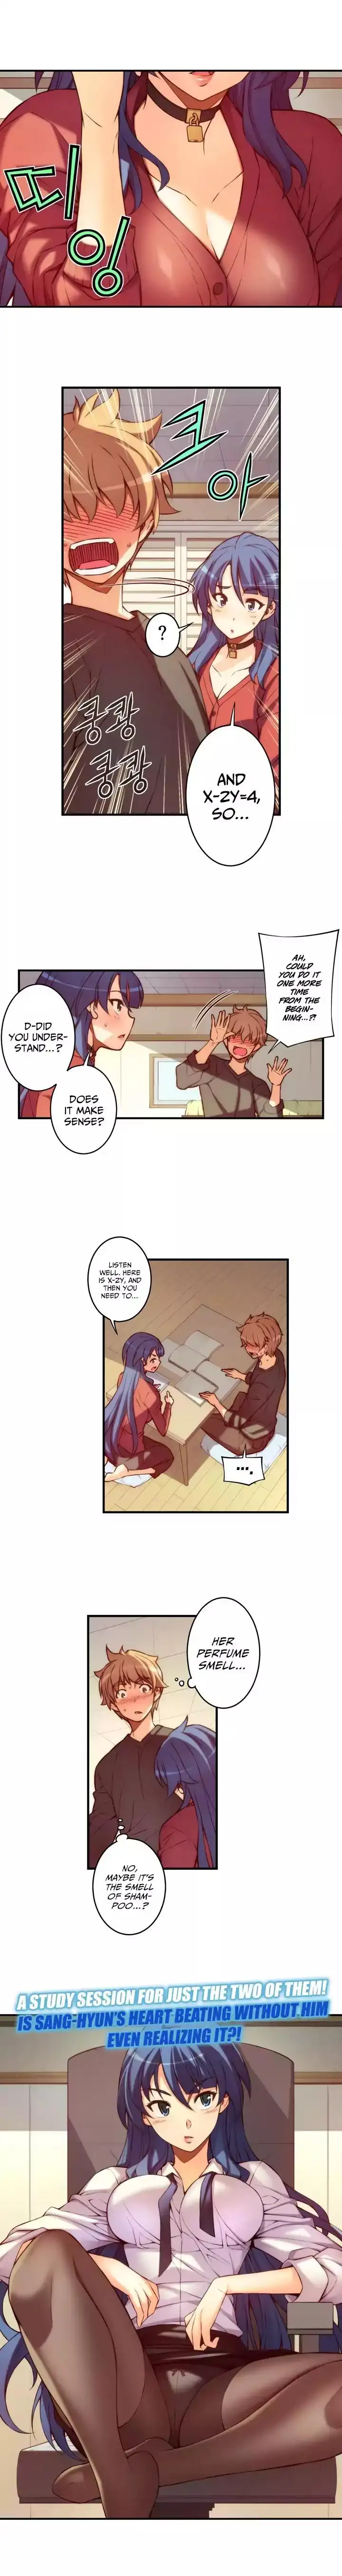 The Fiancées Live Together - Chapter 31 Page 3